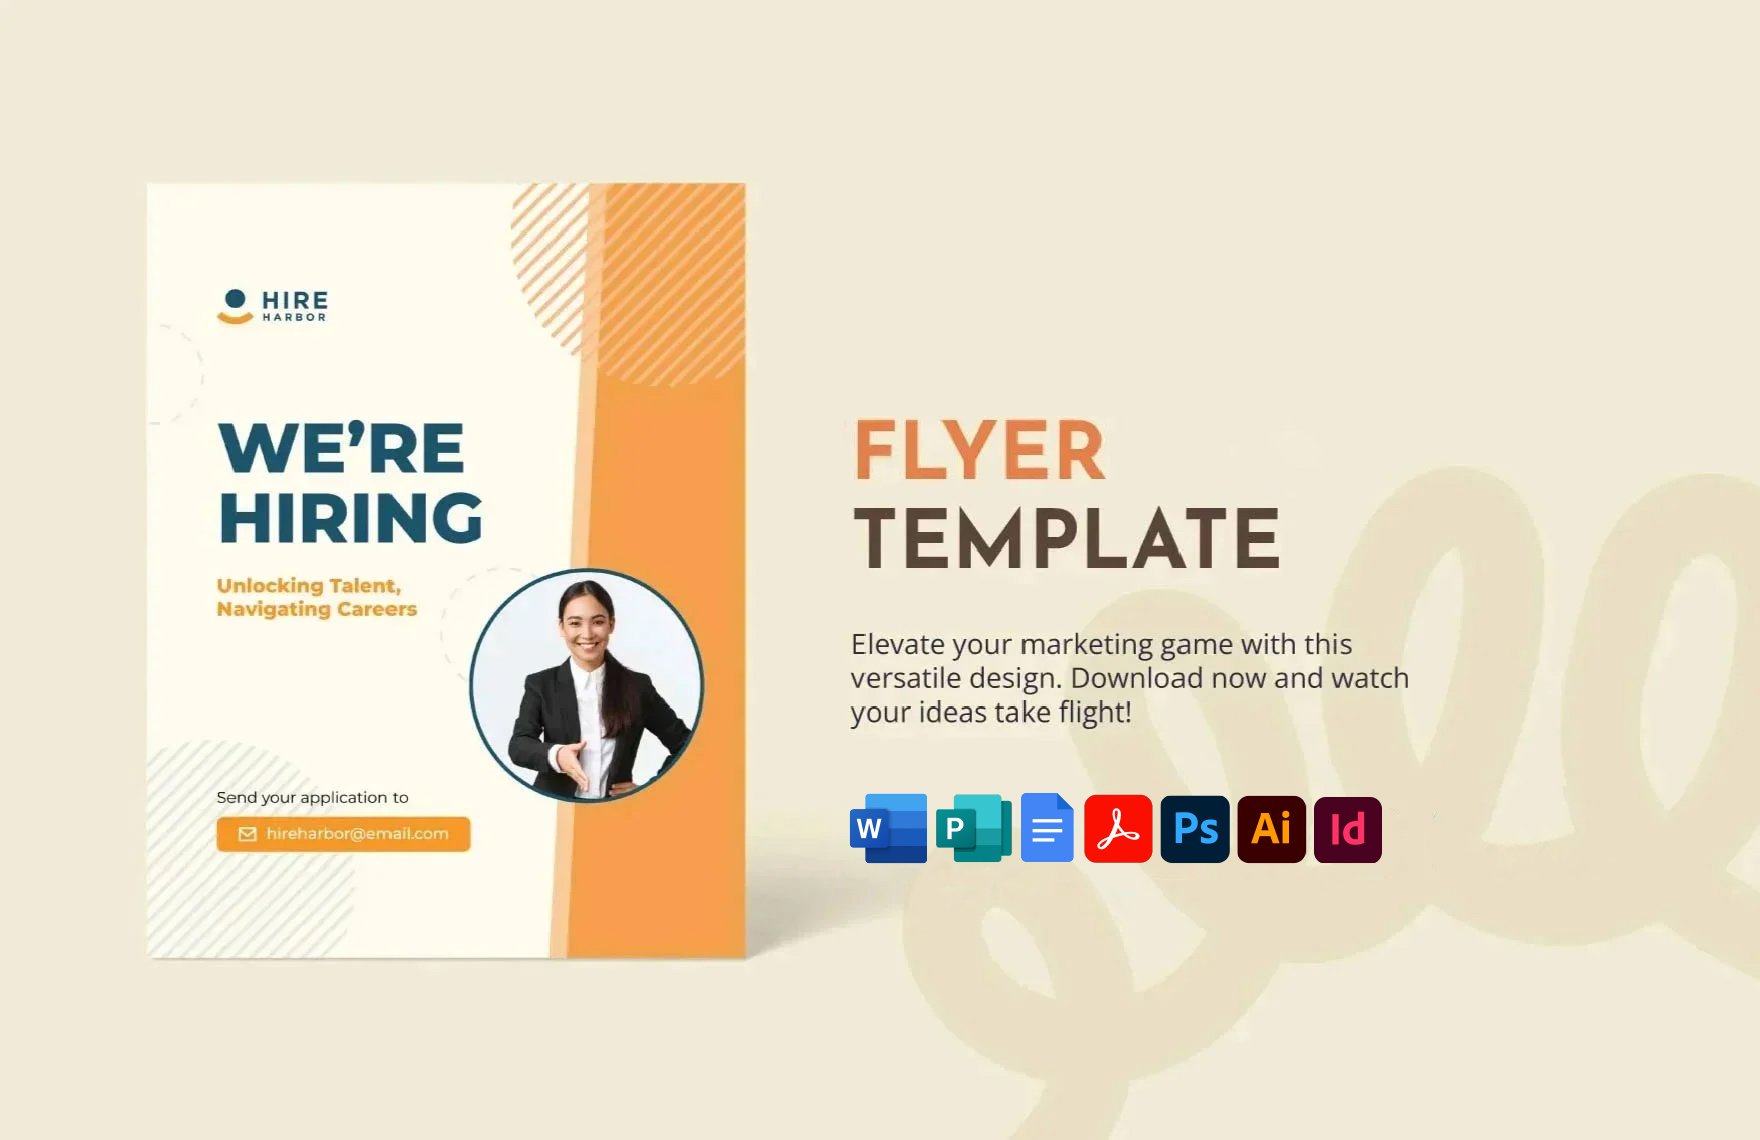 PSD Templates - FREE Download